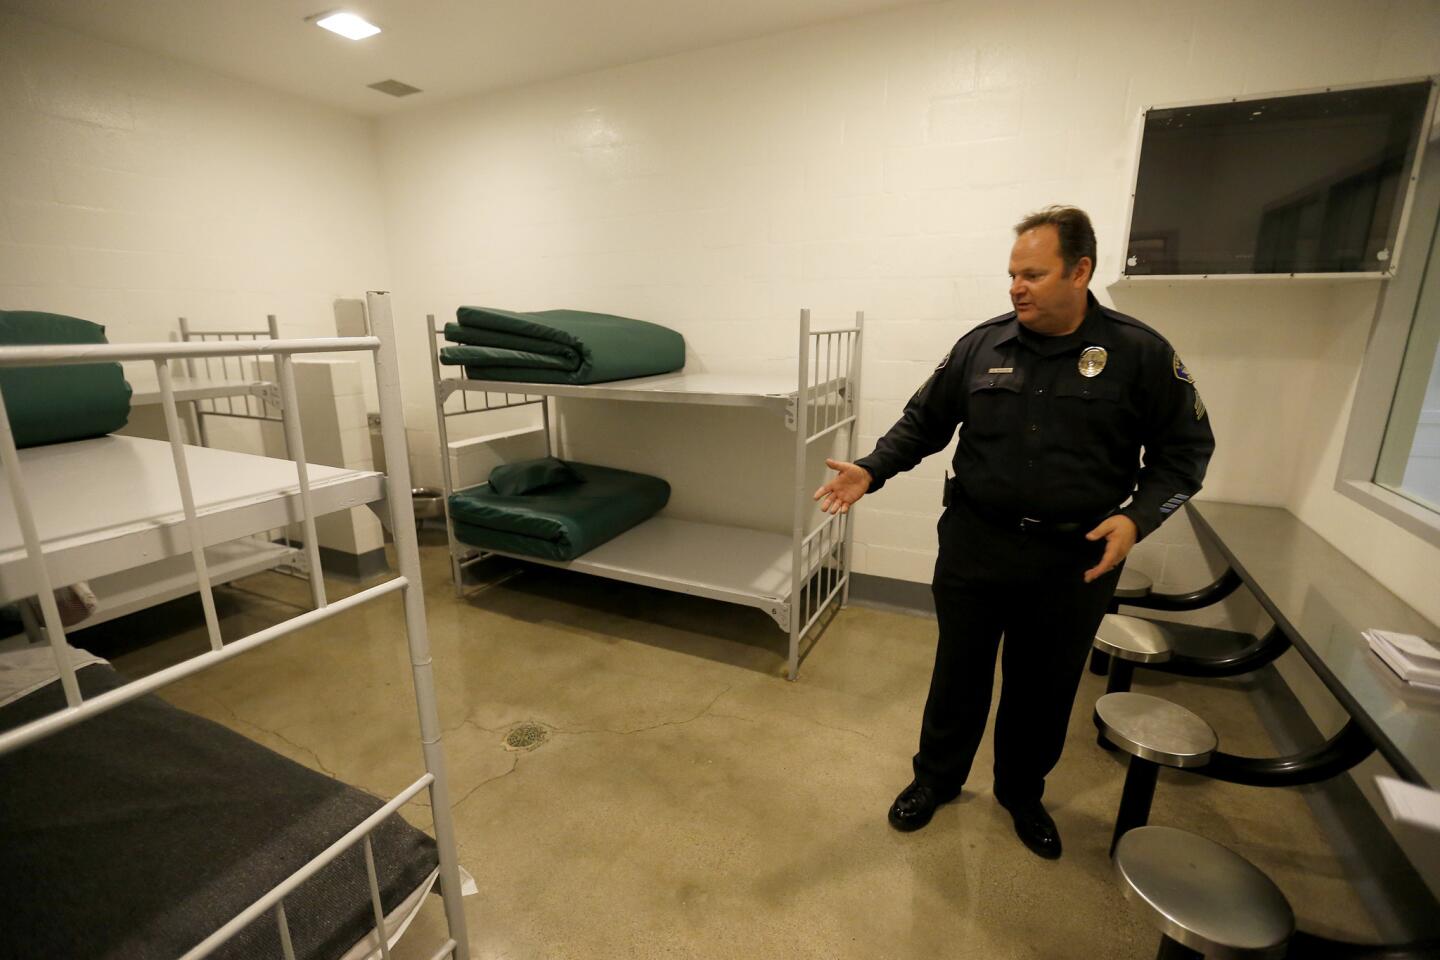 Pay-to-stay jails